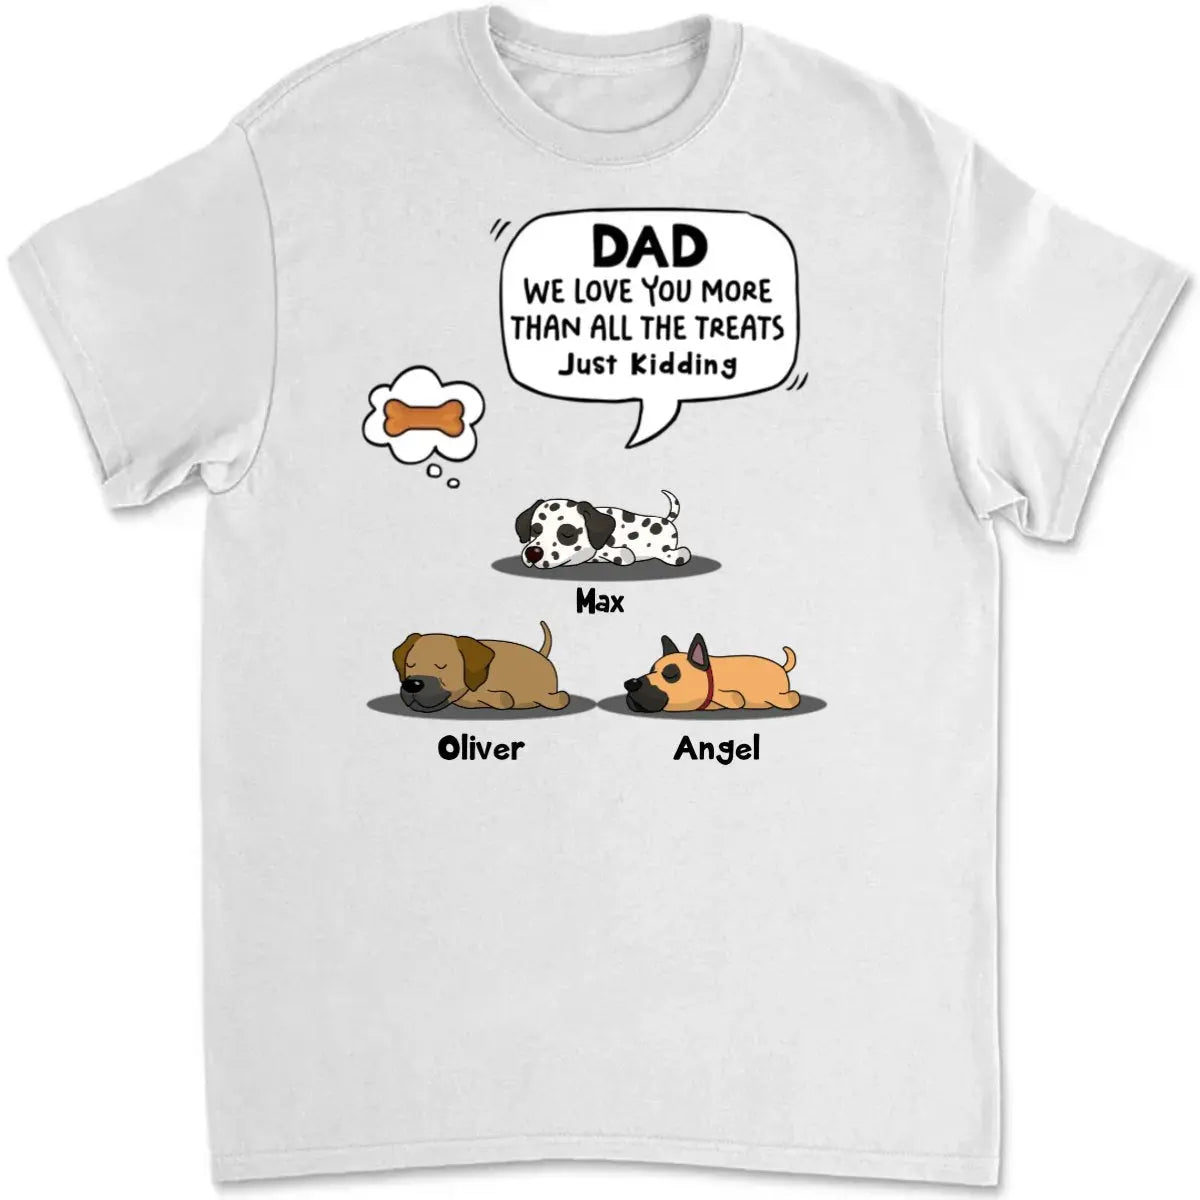 Dog Lovers - We Love You More Than All The Treats, Just Kidding - Personalized Unisex T-shirt (VT)